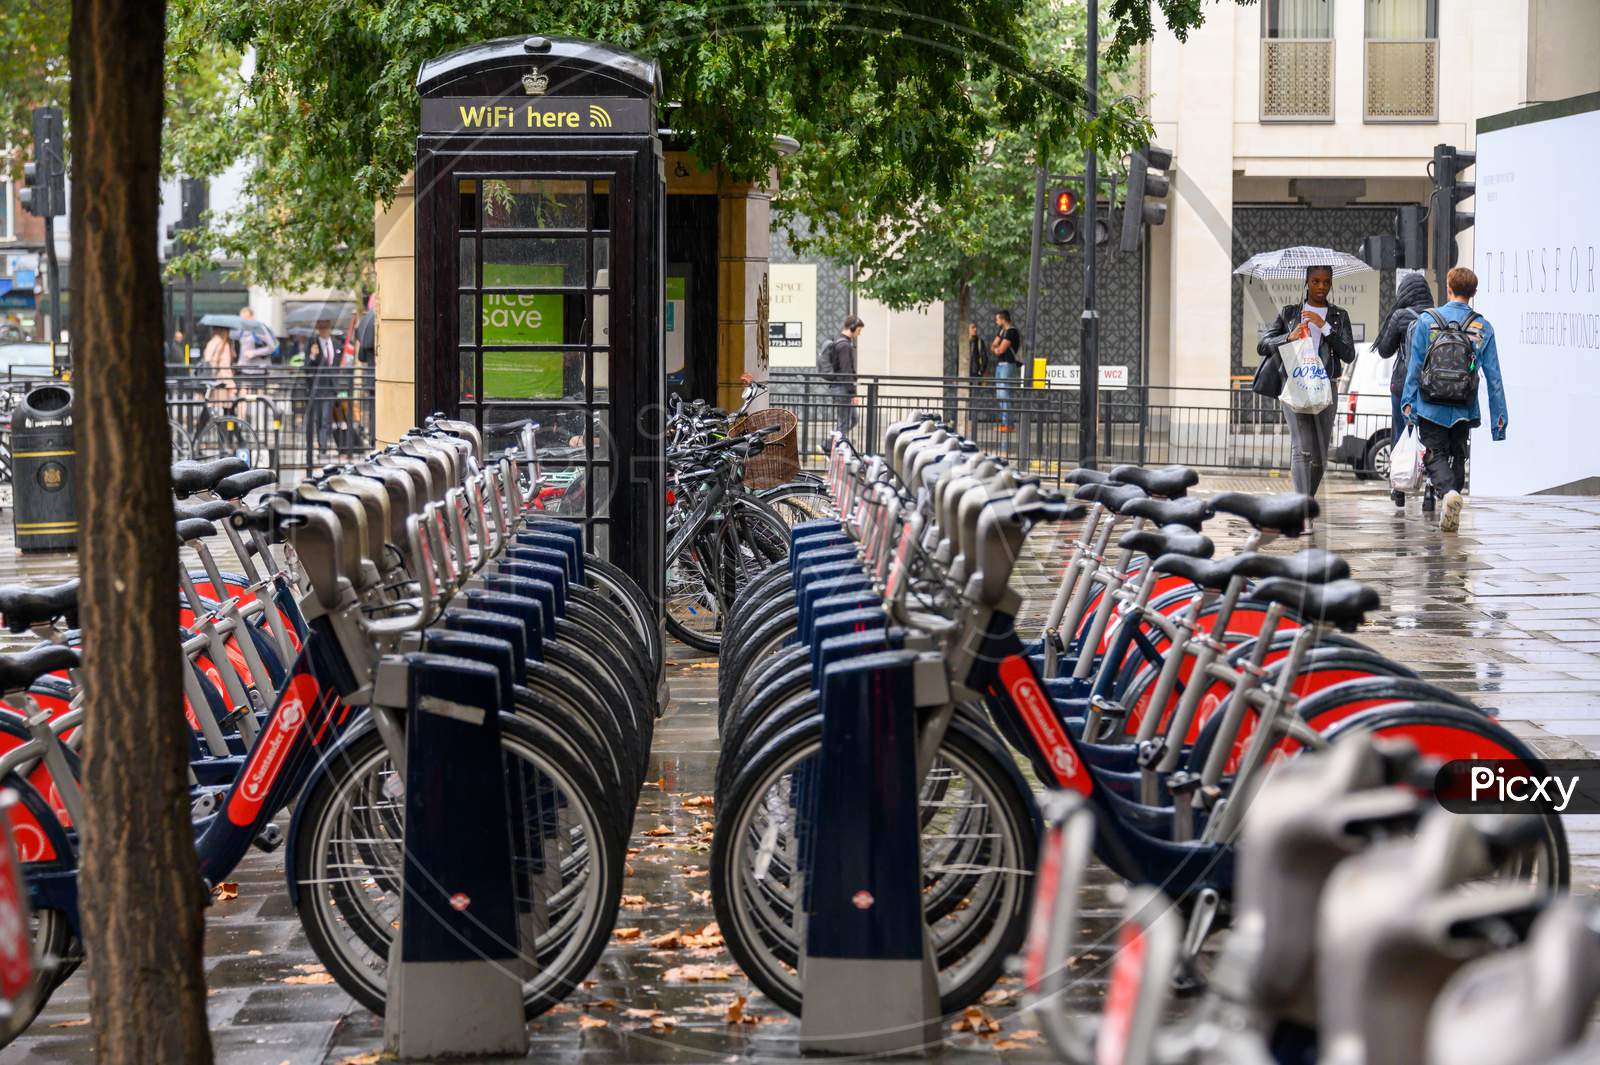 Rows Of "Boris Bikes" For Hire Next To A London Free Wifi Here Black Telephone Box On The Strand On A Rainy Day